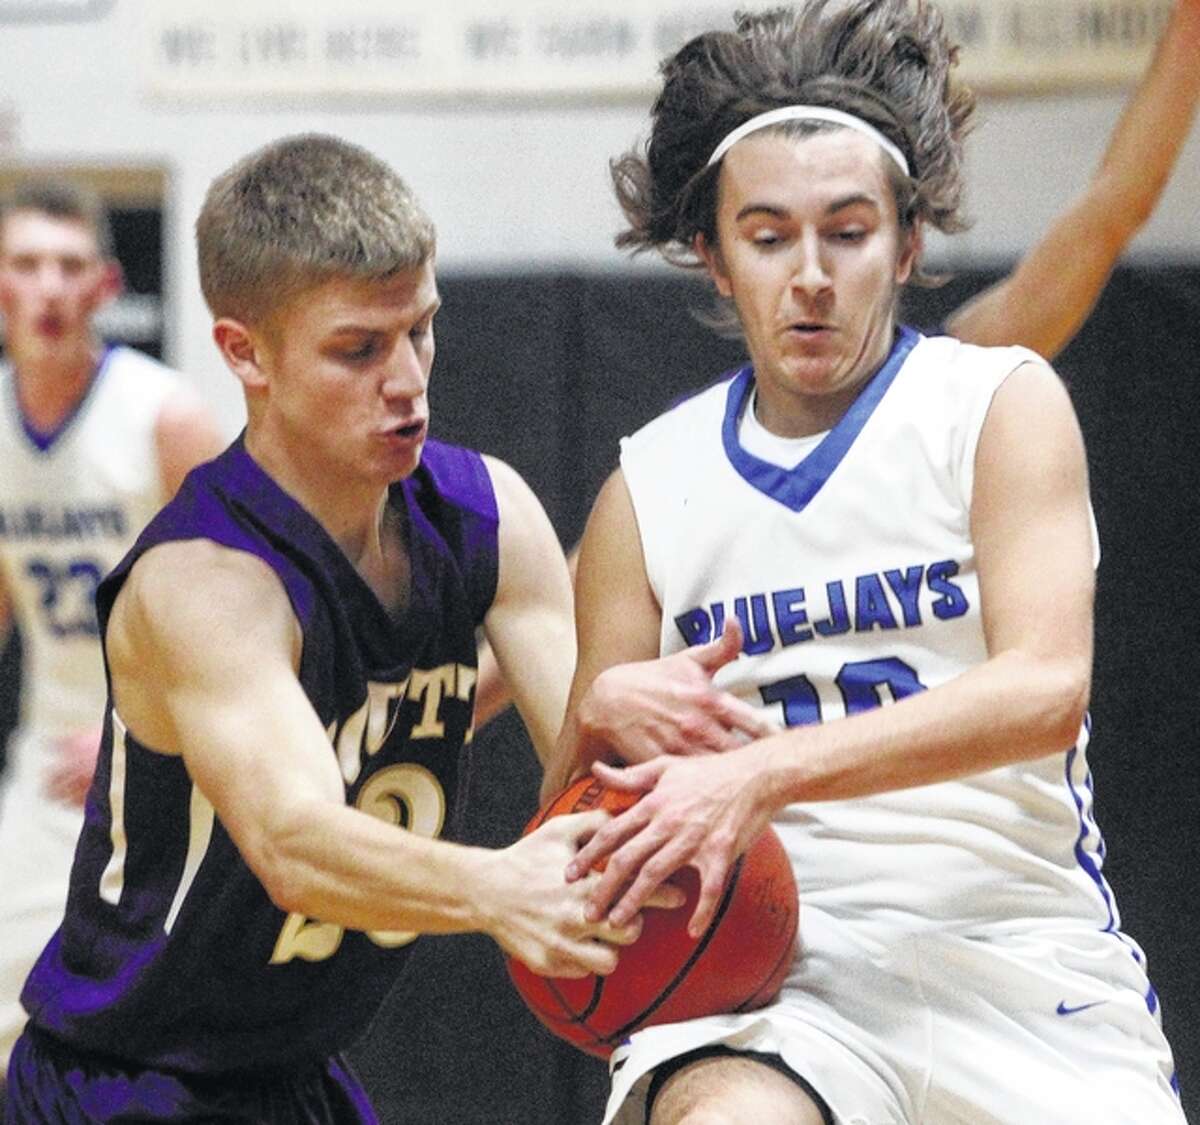 Tyler Jones goes for a steal during a game against Routt at the Winchester Invitatational Tournament Monday night.